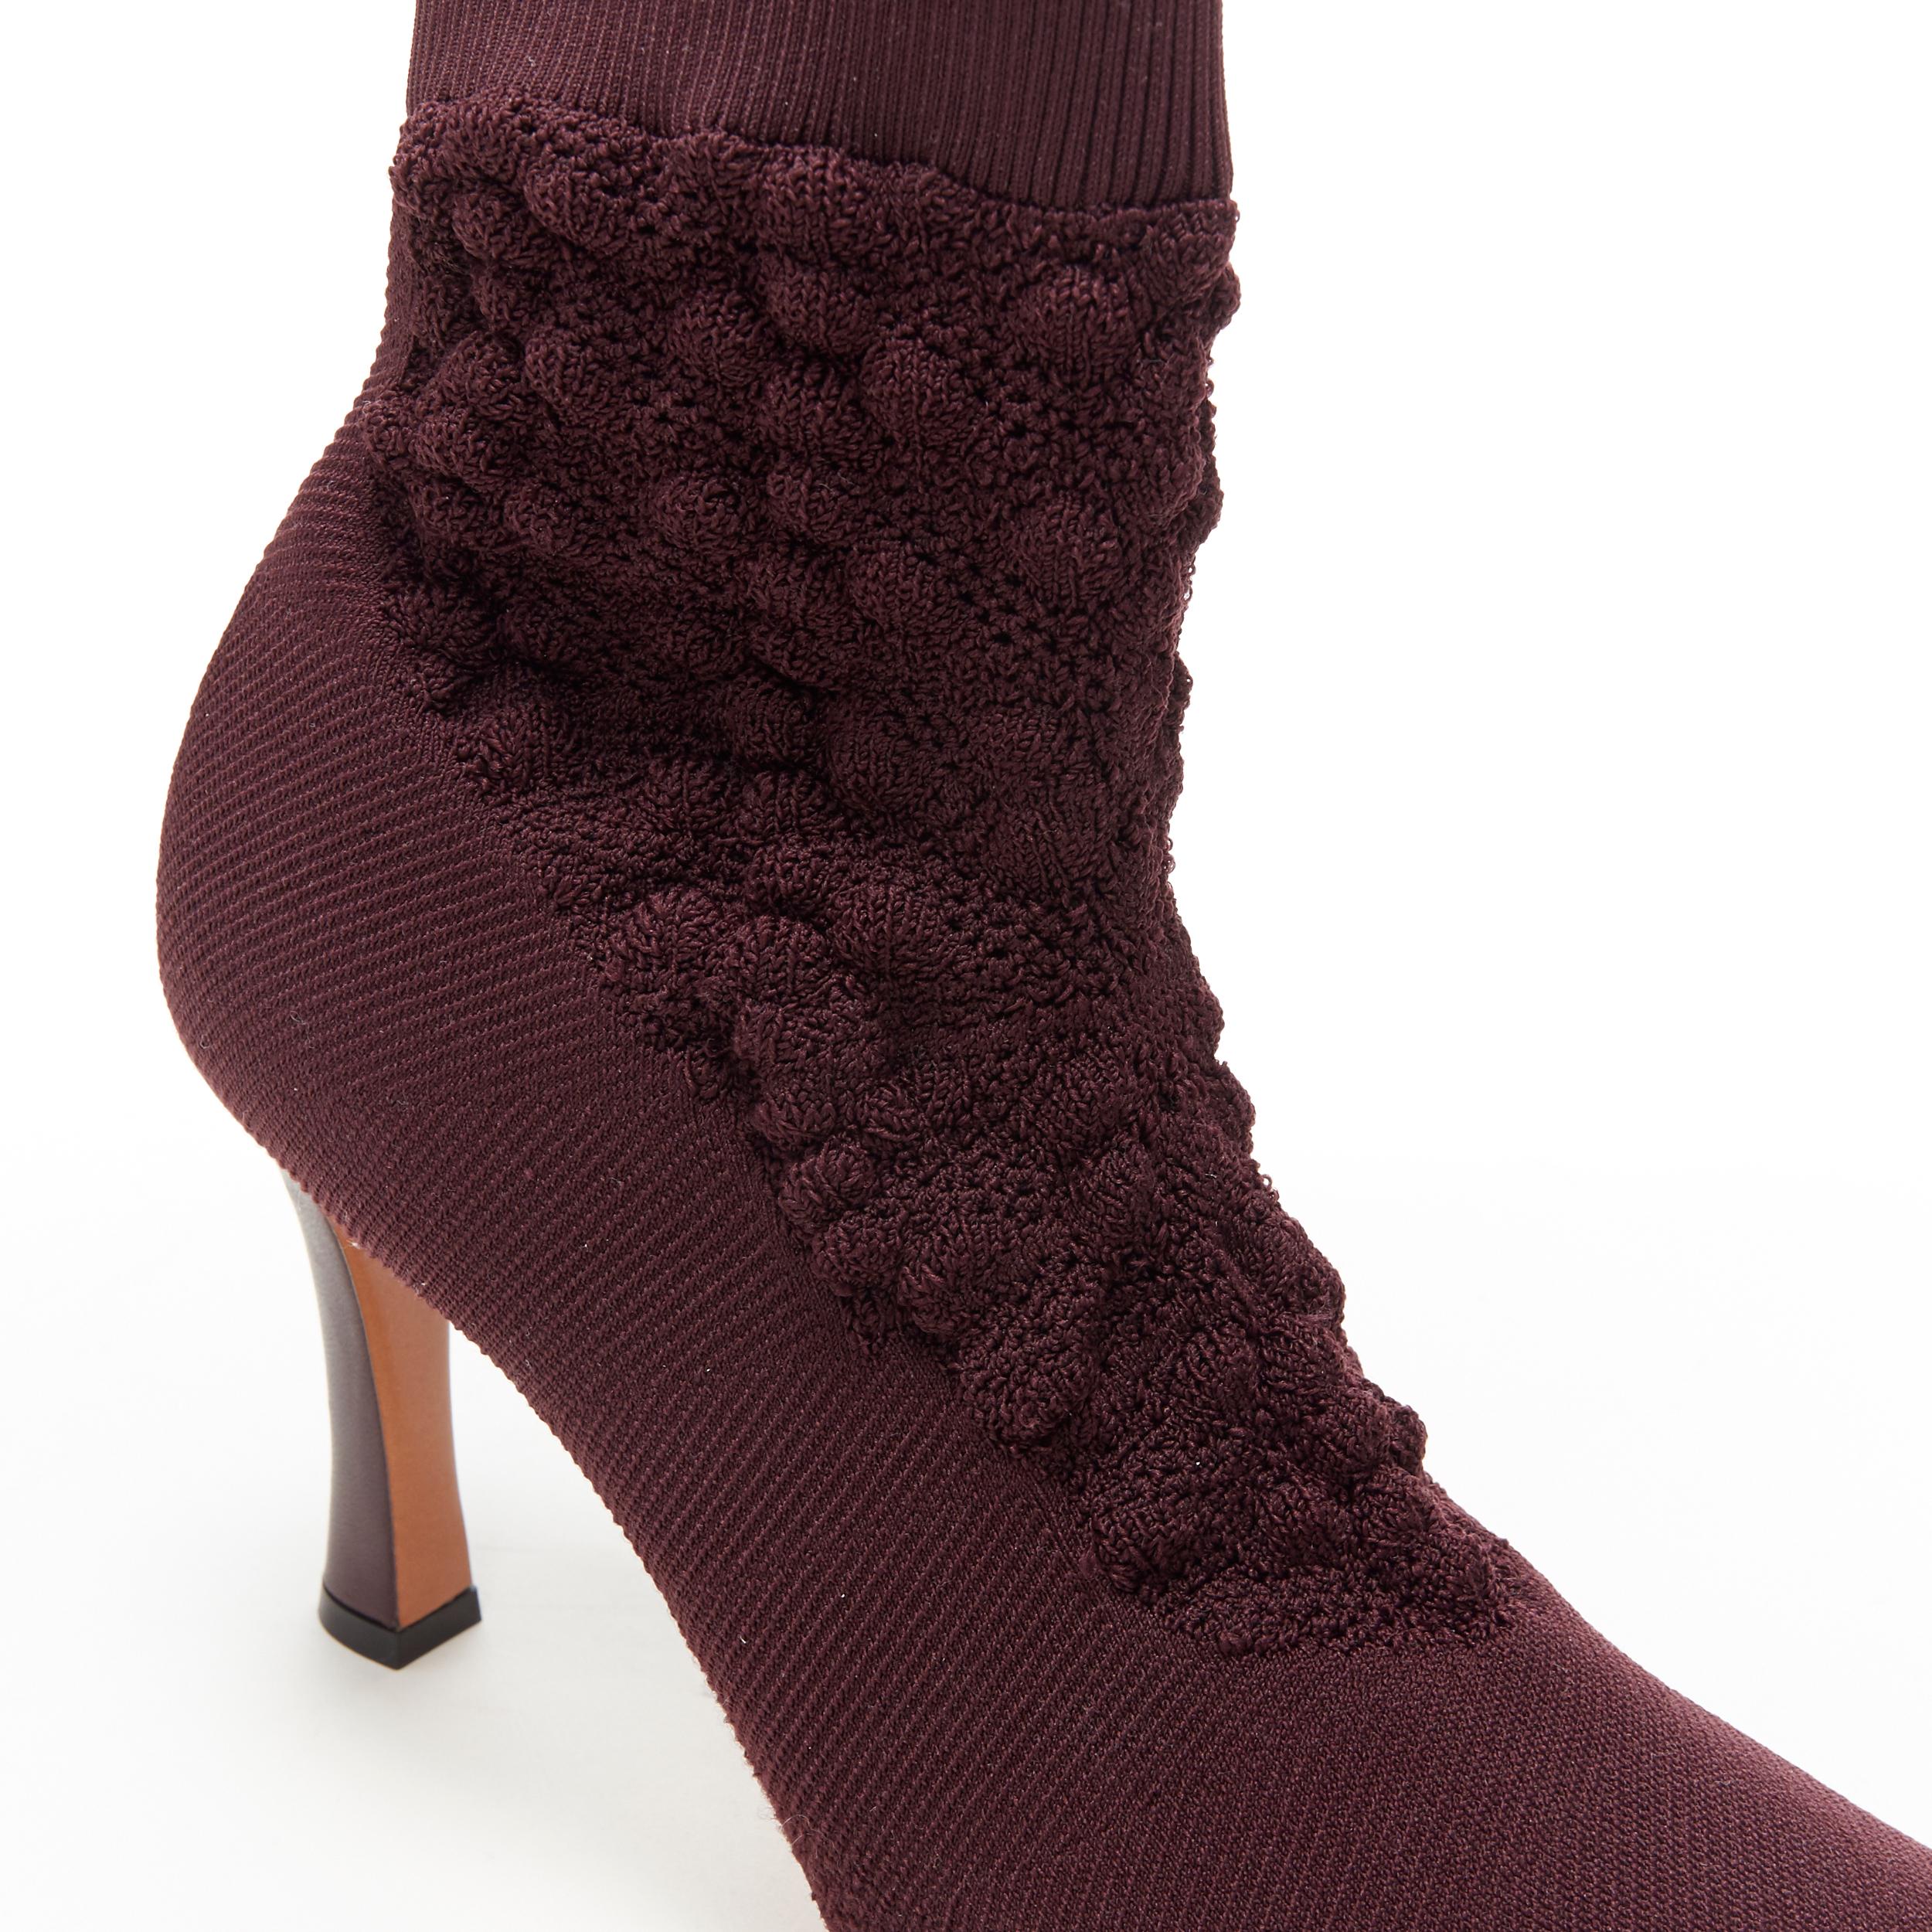 Women's new OLD CELINE Glove Bootie burgundy textured sock knit square toe boots EU40